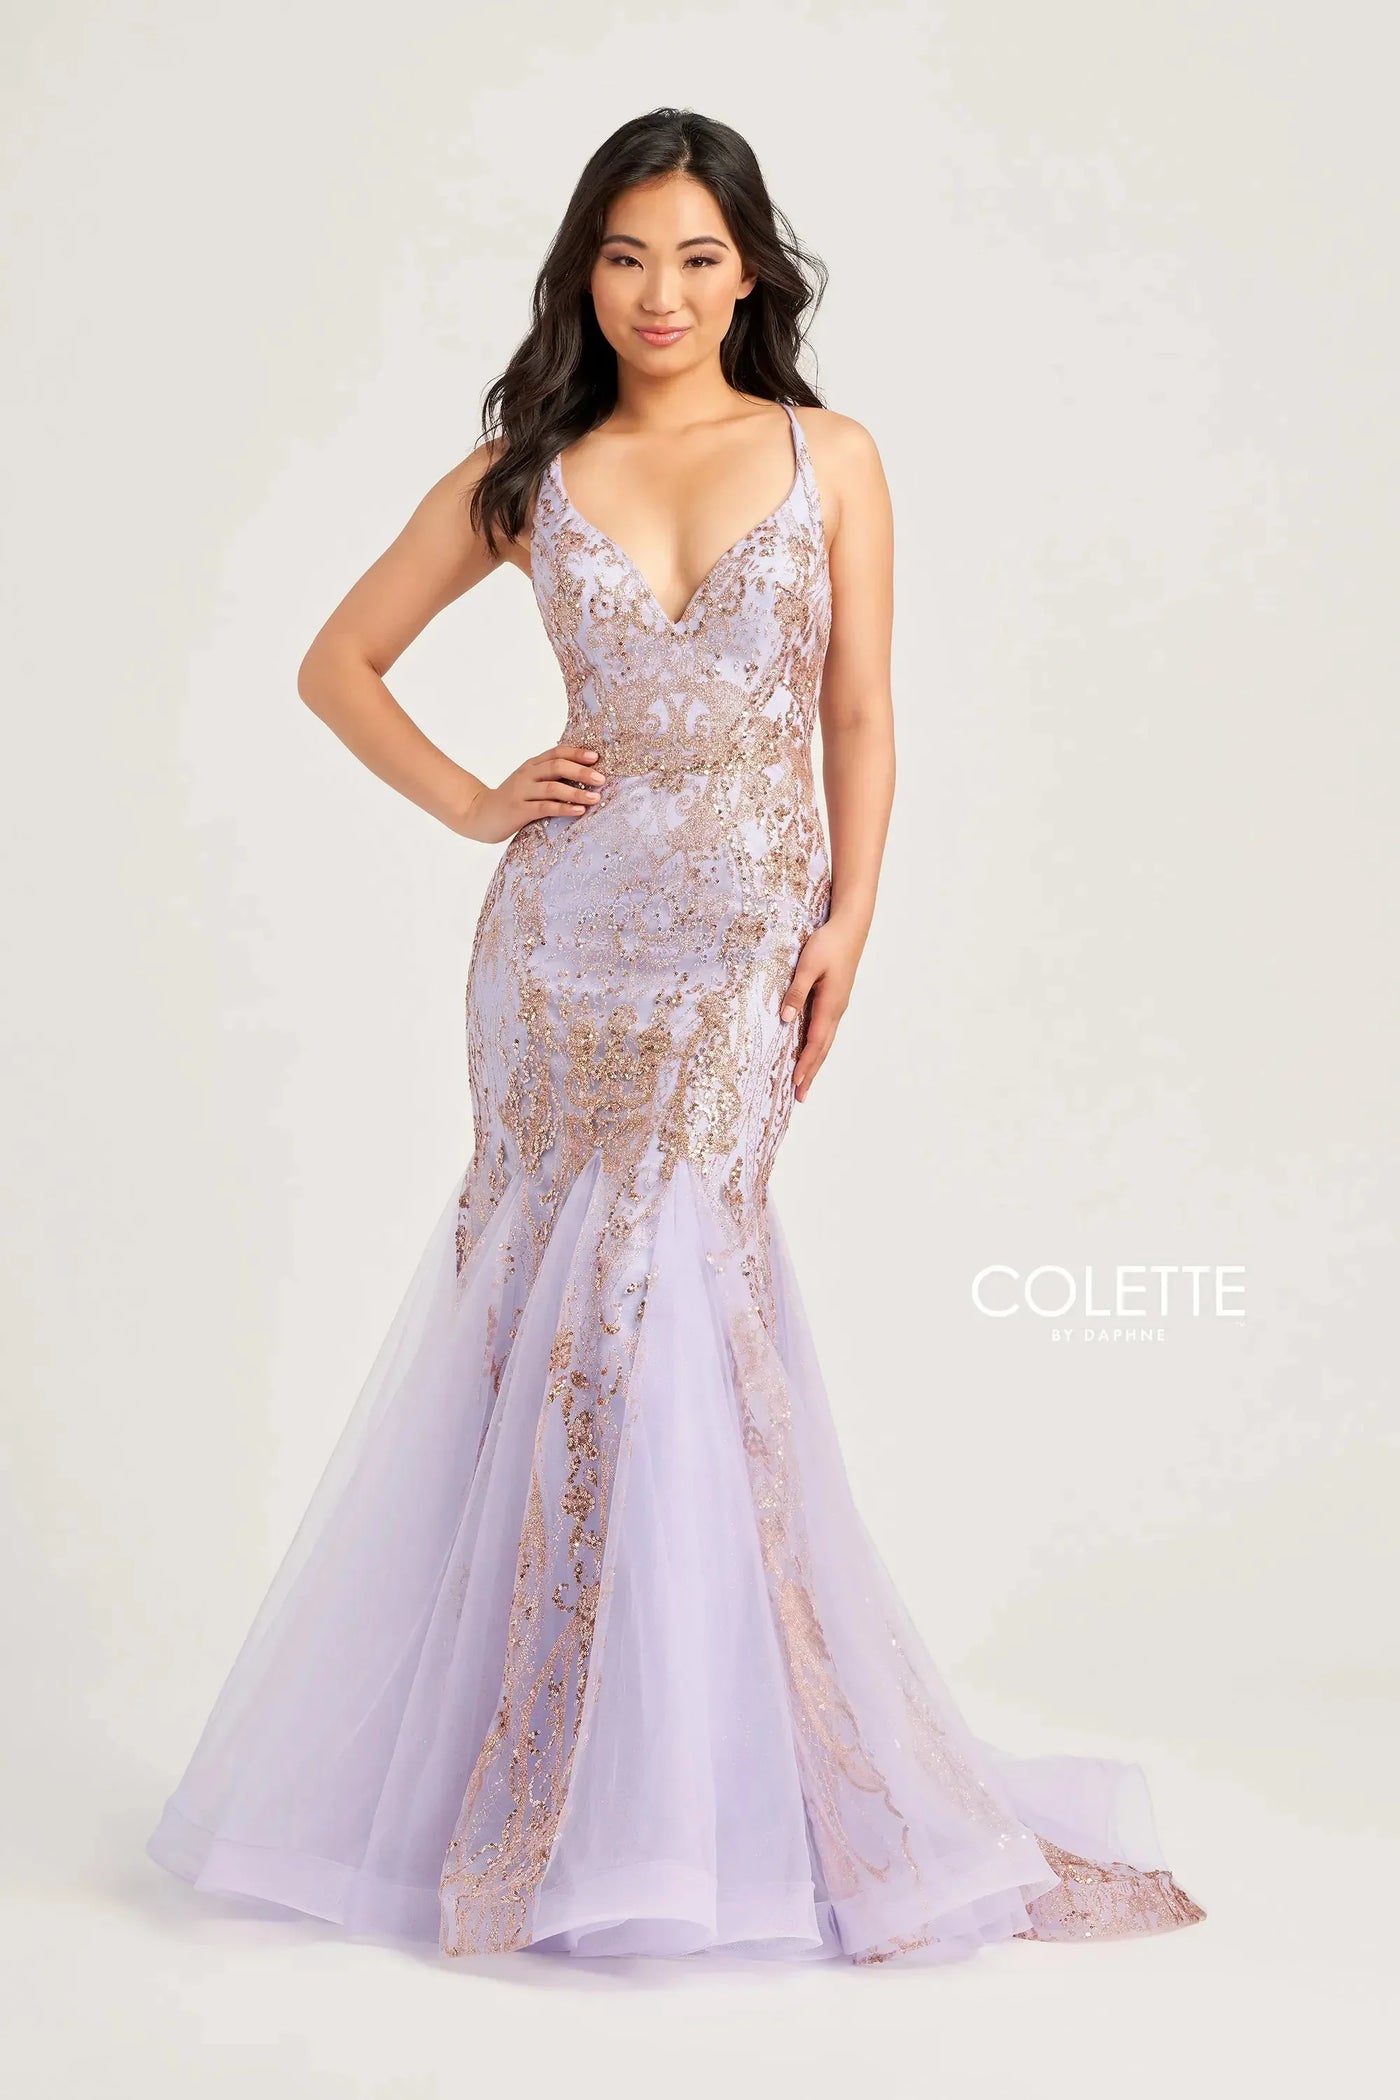 Colette By Daphne CL5109 - Glitter Mermaid Prom Dress